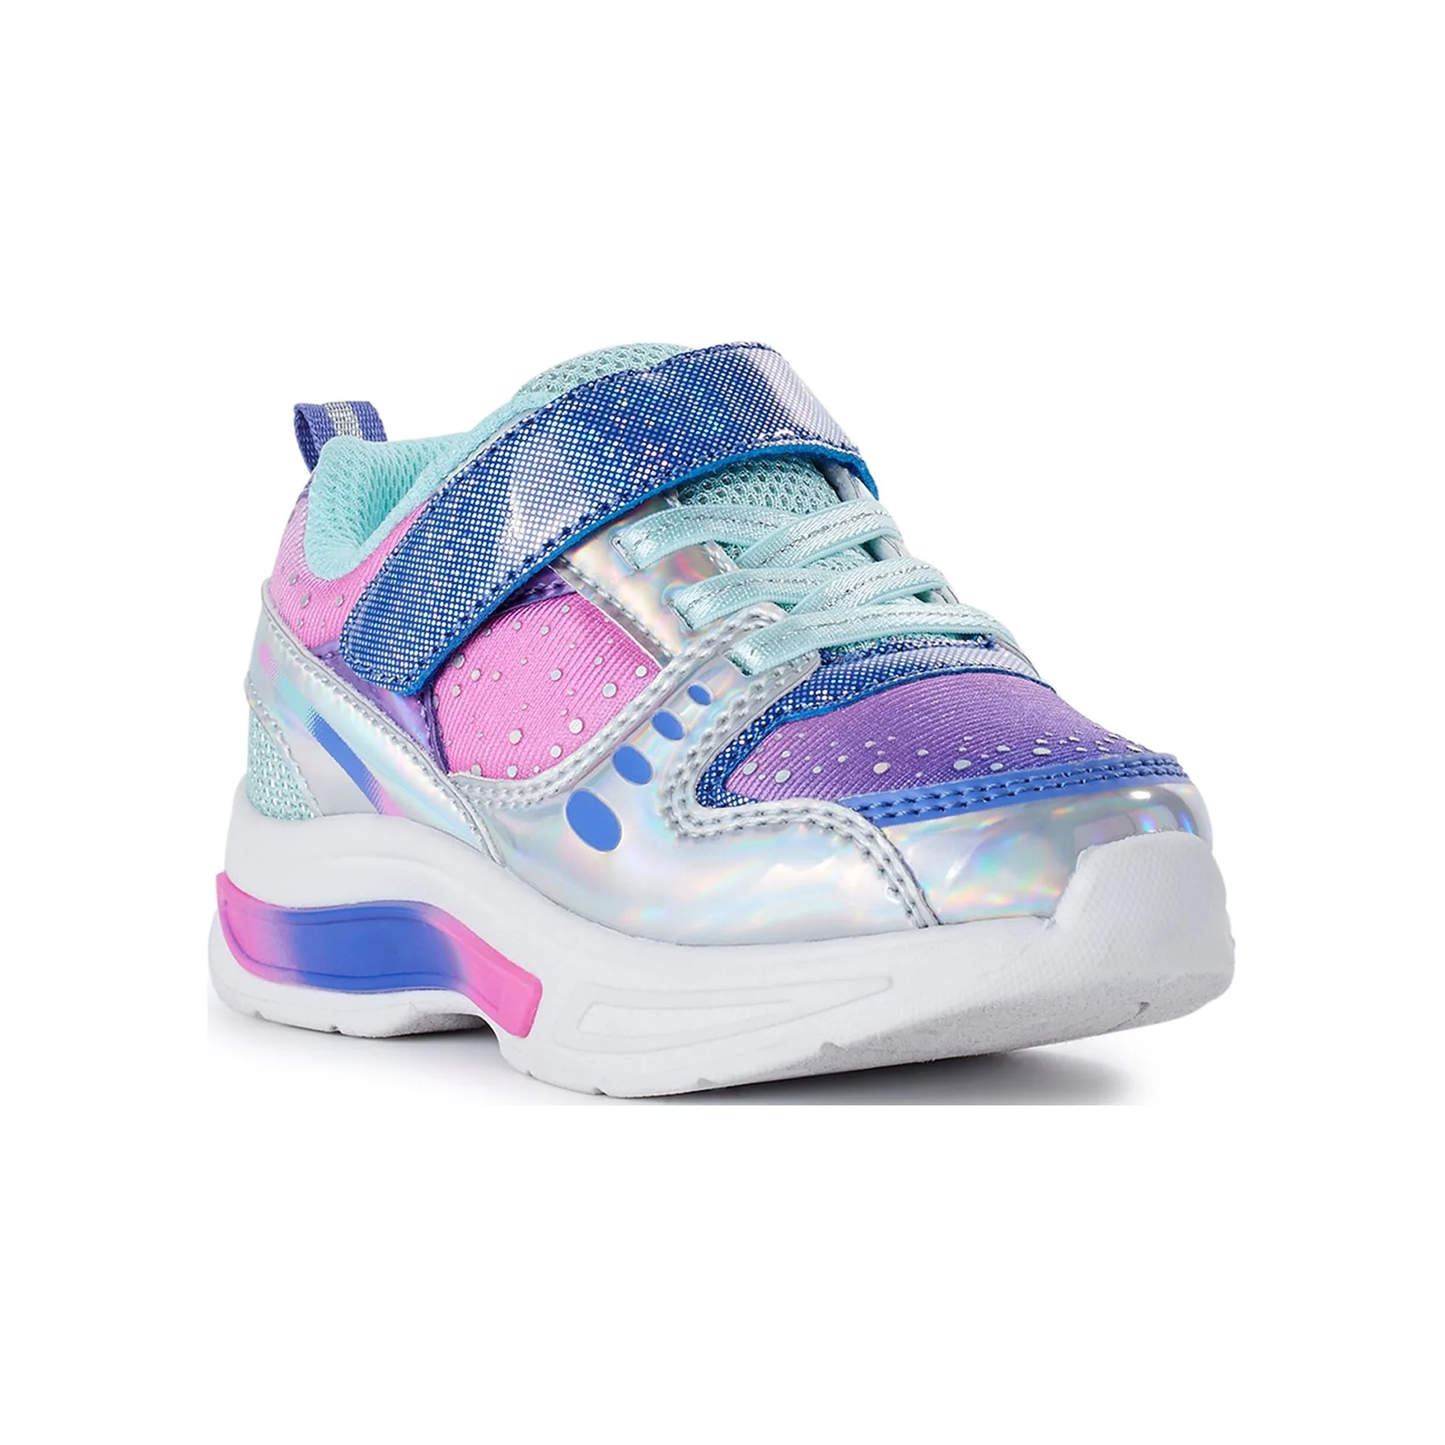 Toddler Girls Low Top Light Up Sneakers